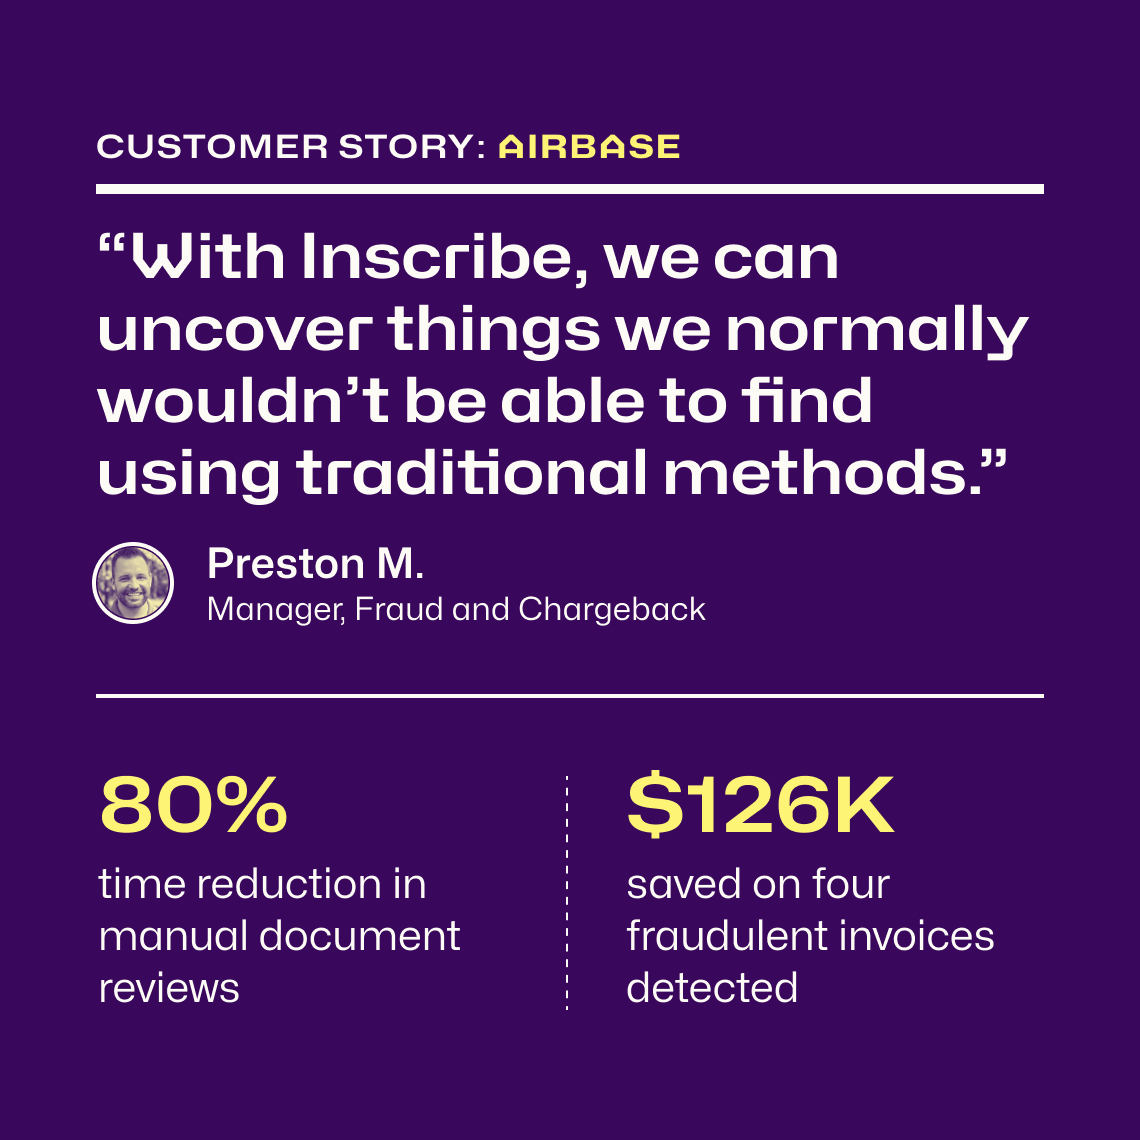 See why Preston Miller and his skilled team at @AirbaseHQ put their trust in Inscribe: inscribe.ai/customers/airb…